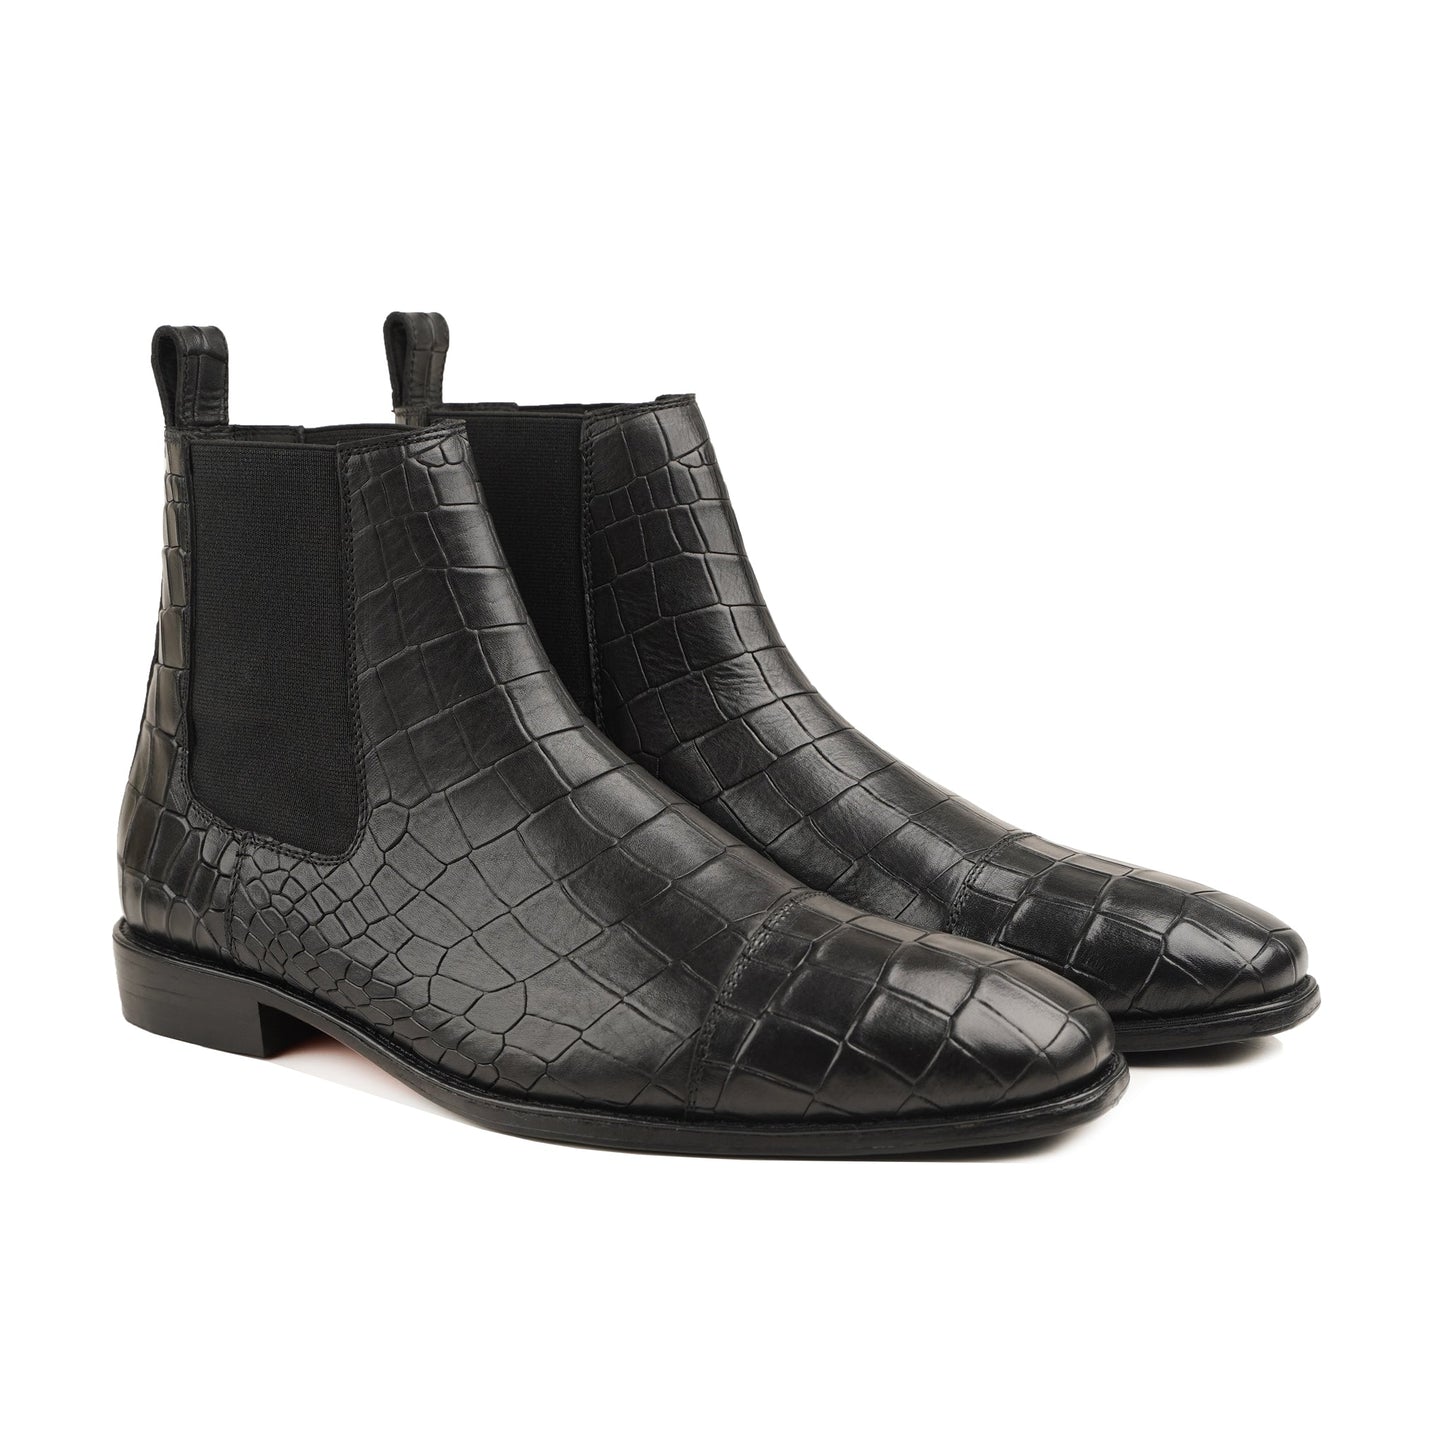 New York Demi Chelsea Boot A2 Premium Handmade Quality Leather Boots